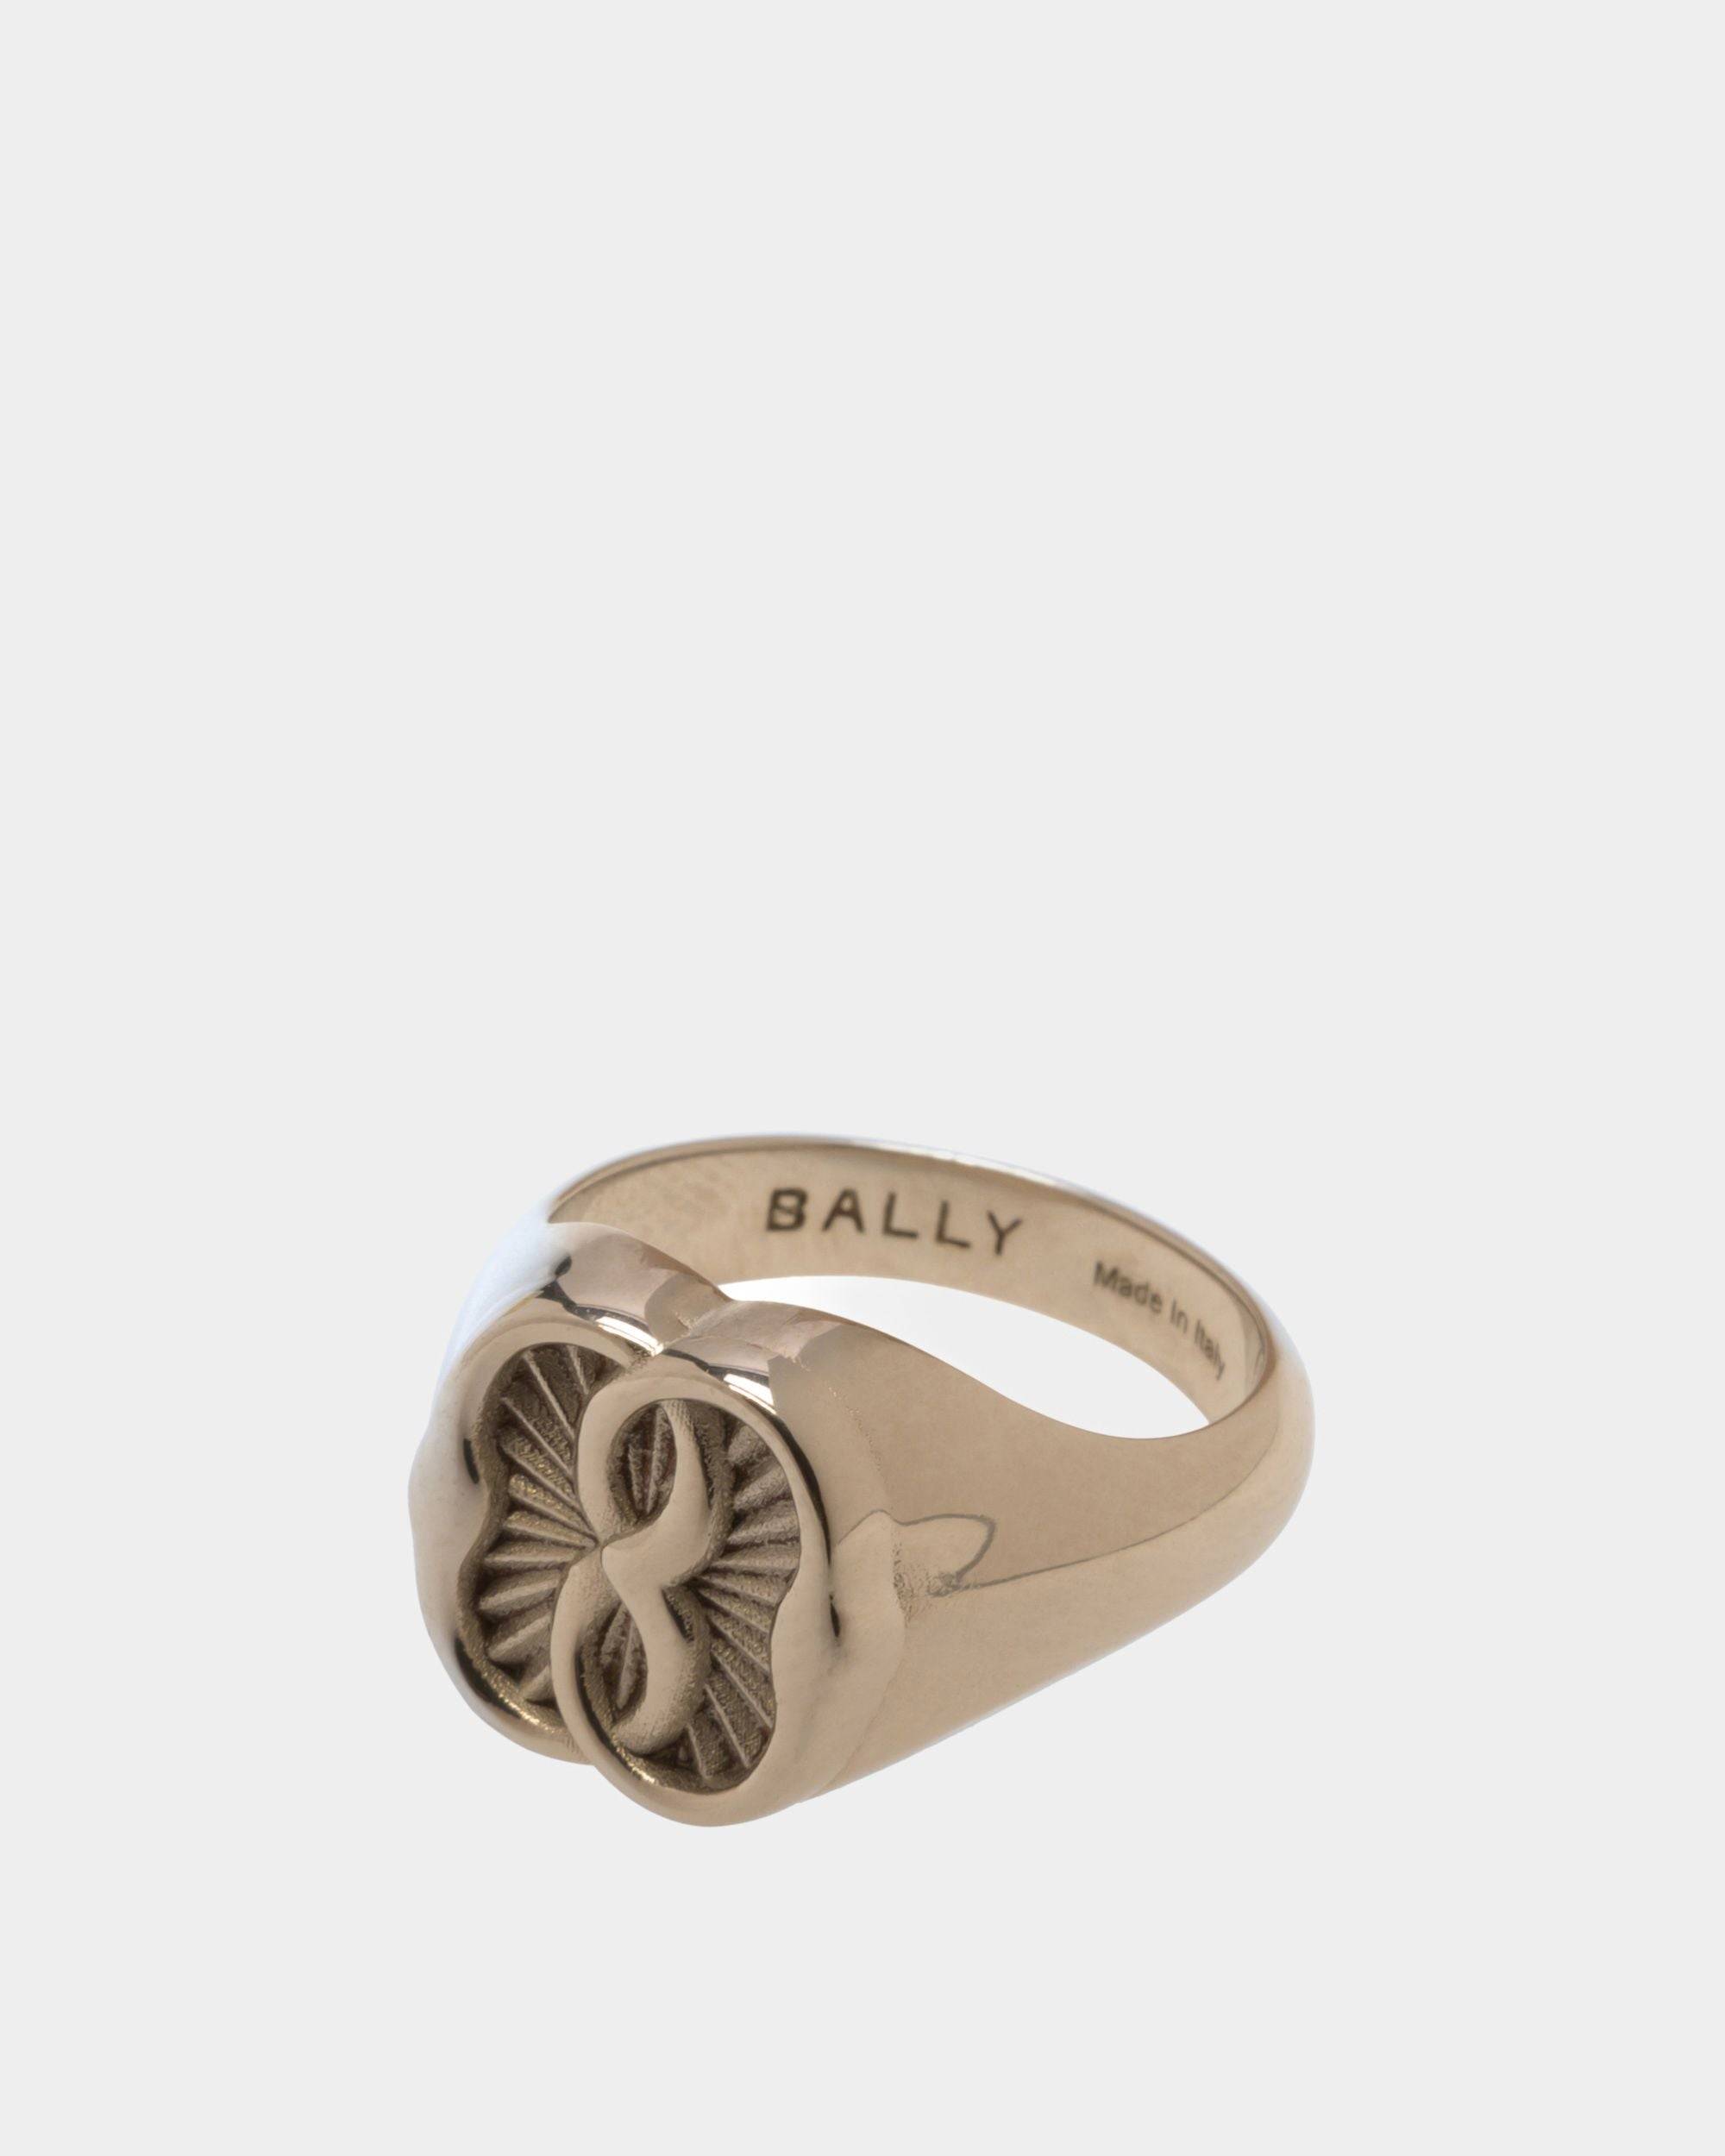 Emblem | Women's Ring in Silver Eco Brass | Bally | Still Life Front